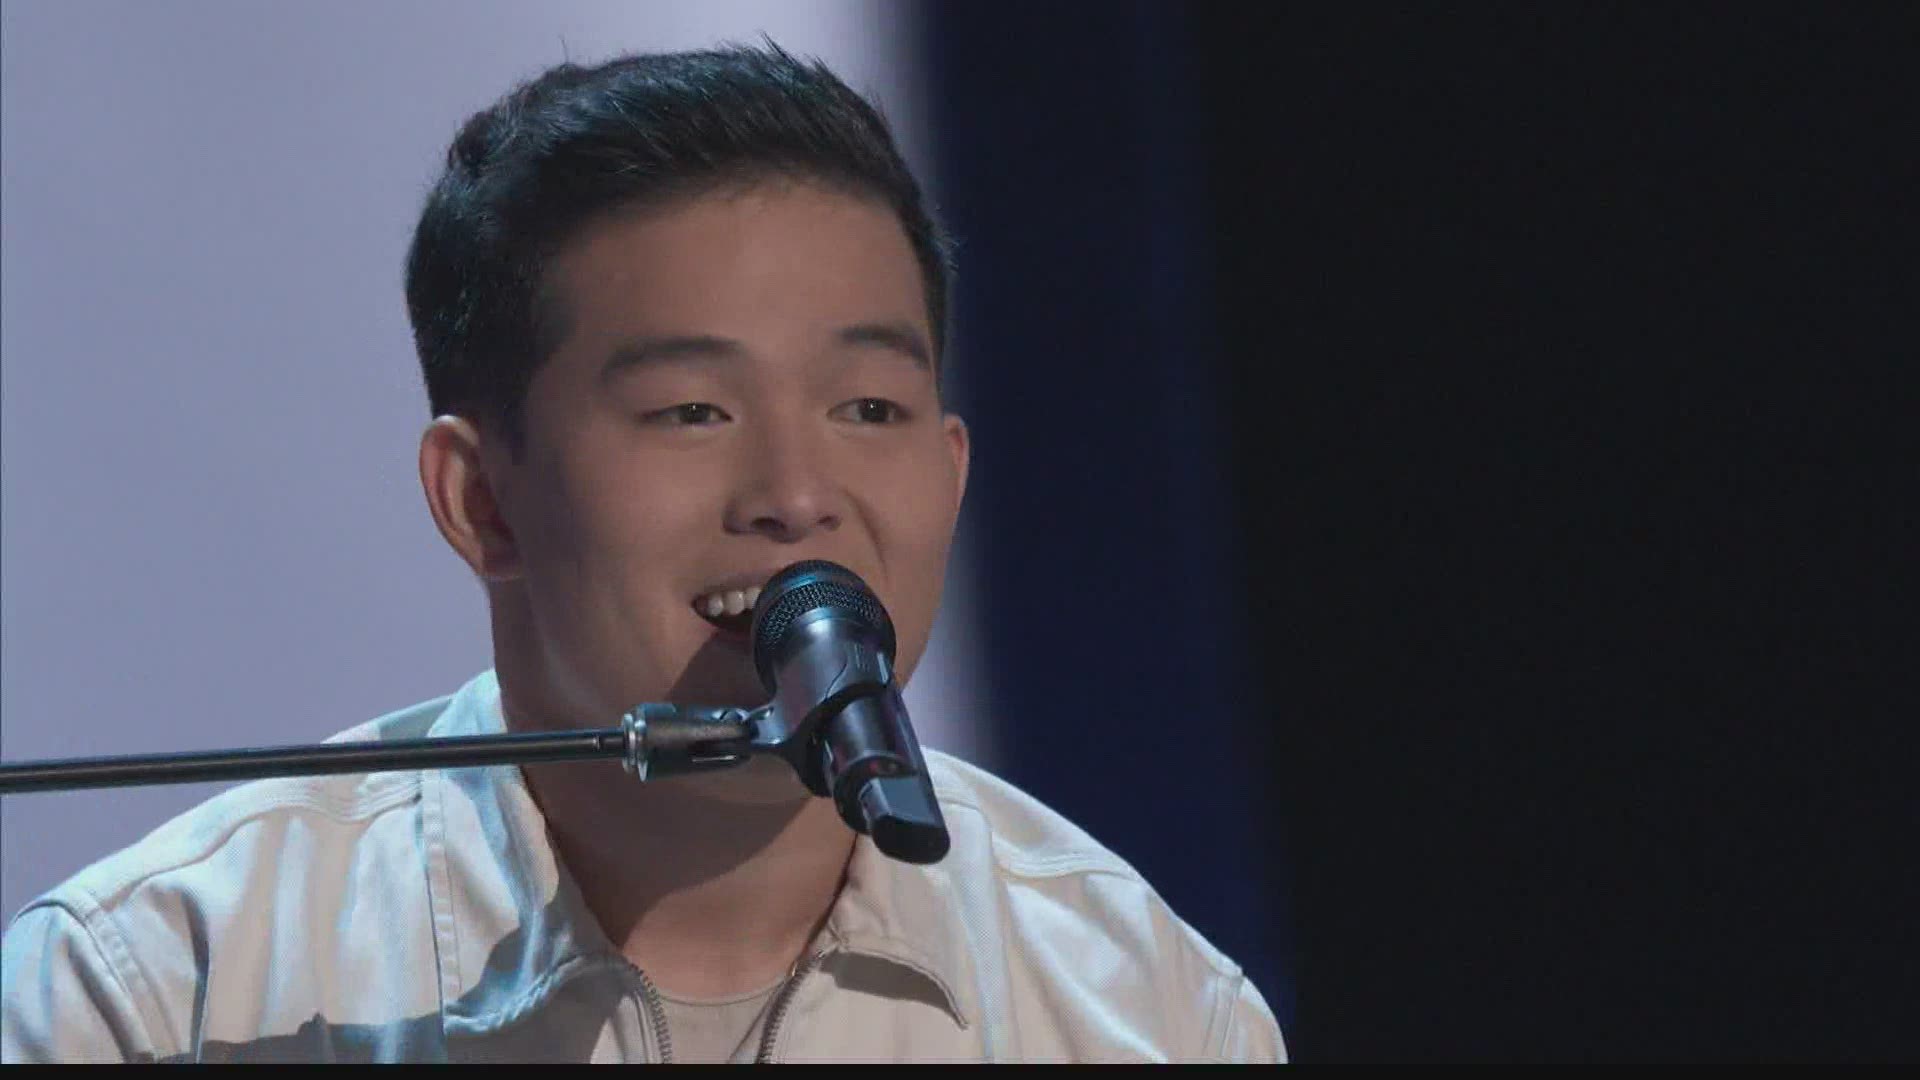 Keegan Ferrell, 21, sang "She Will Be Loved" by Maroon 5 during his blind audition.